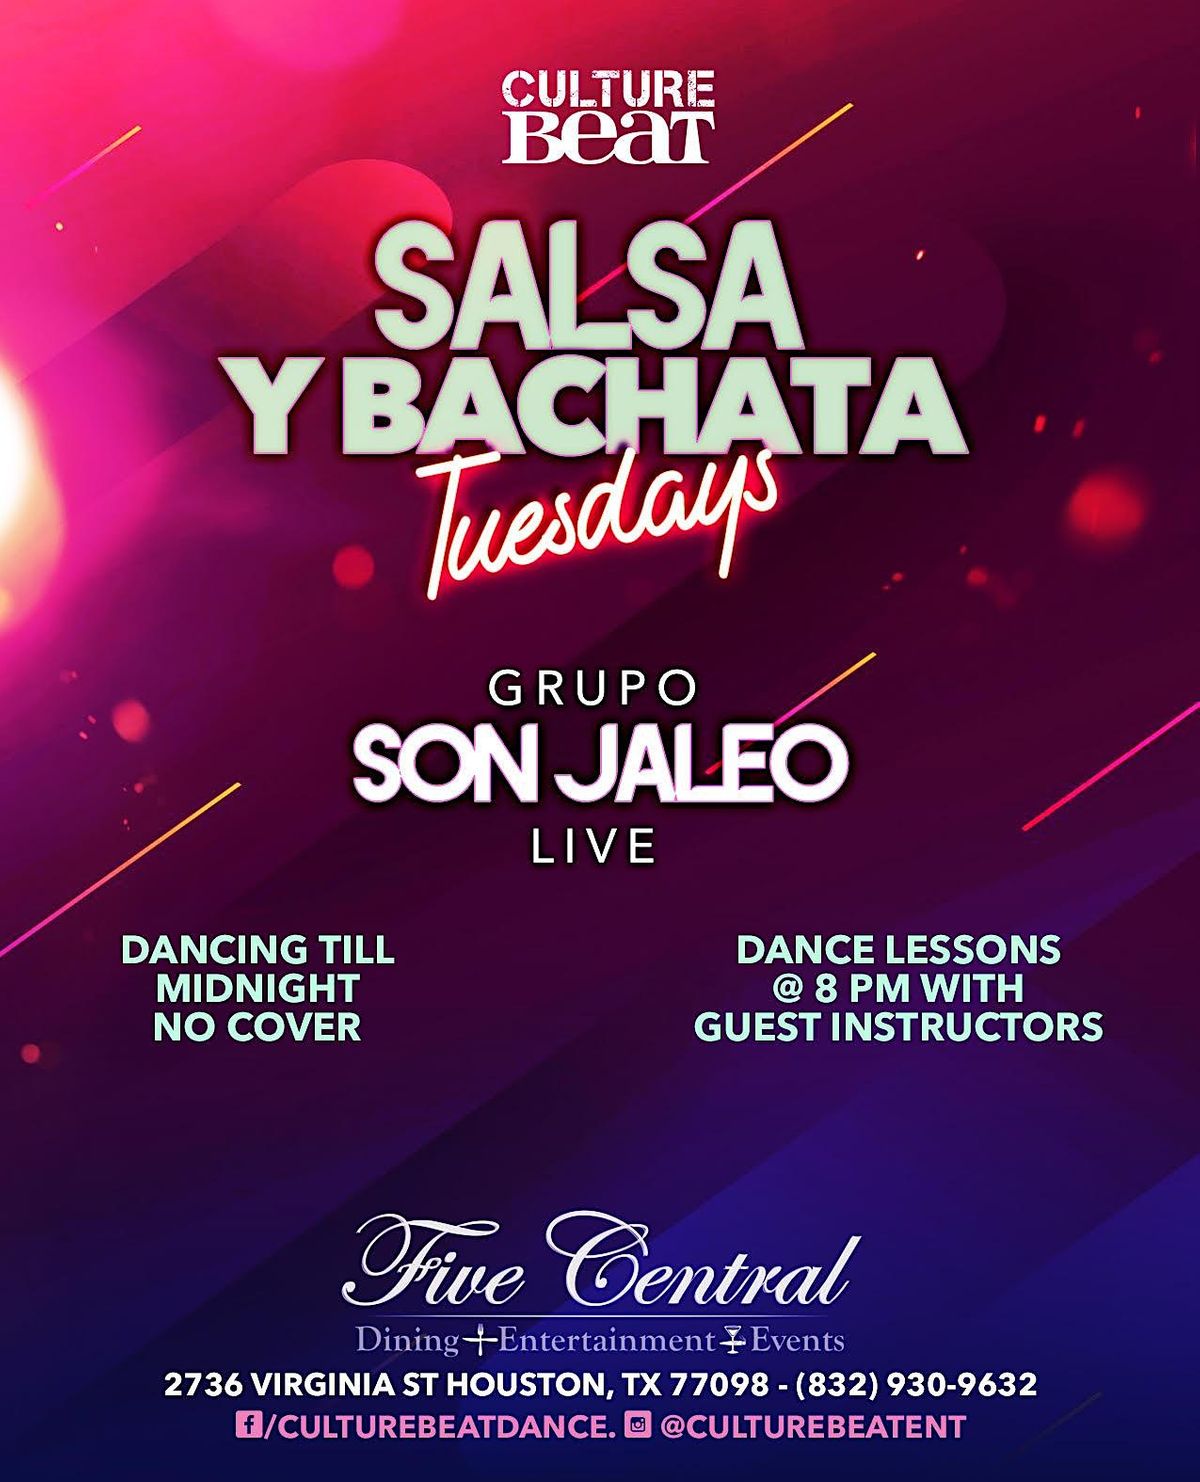 Salsa y Bachata TUESDAYS at FIVE CENTRAL, River Oaks, LIVE BAND! Free!